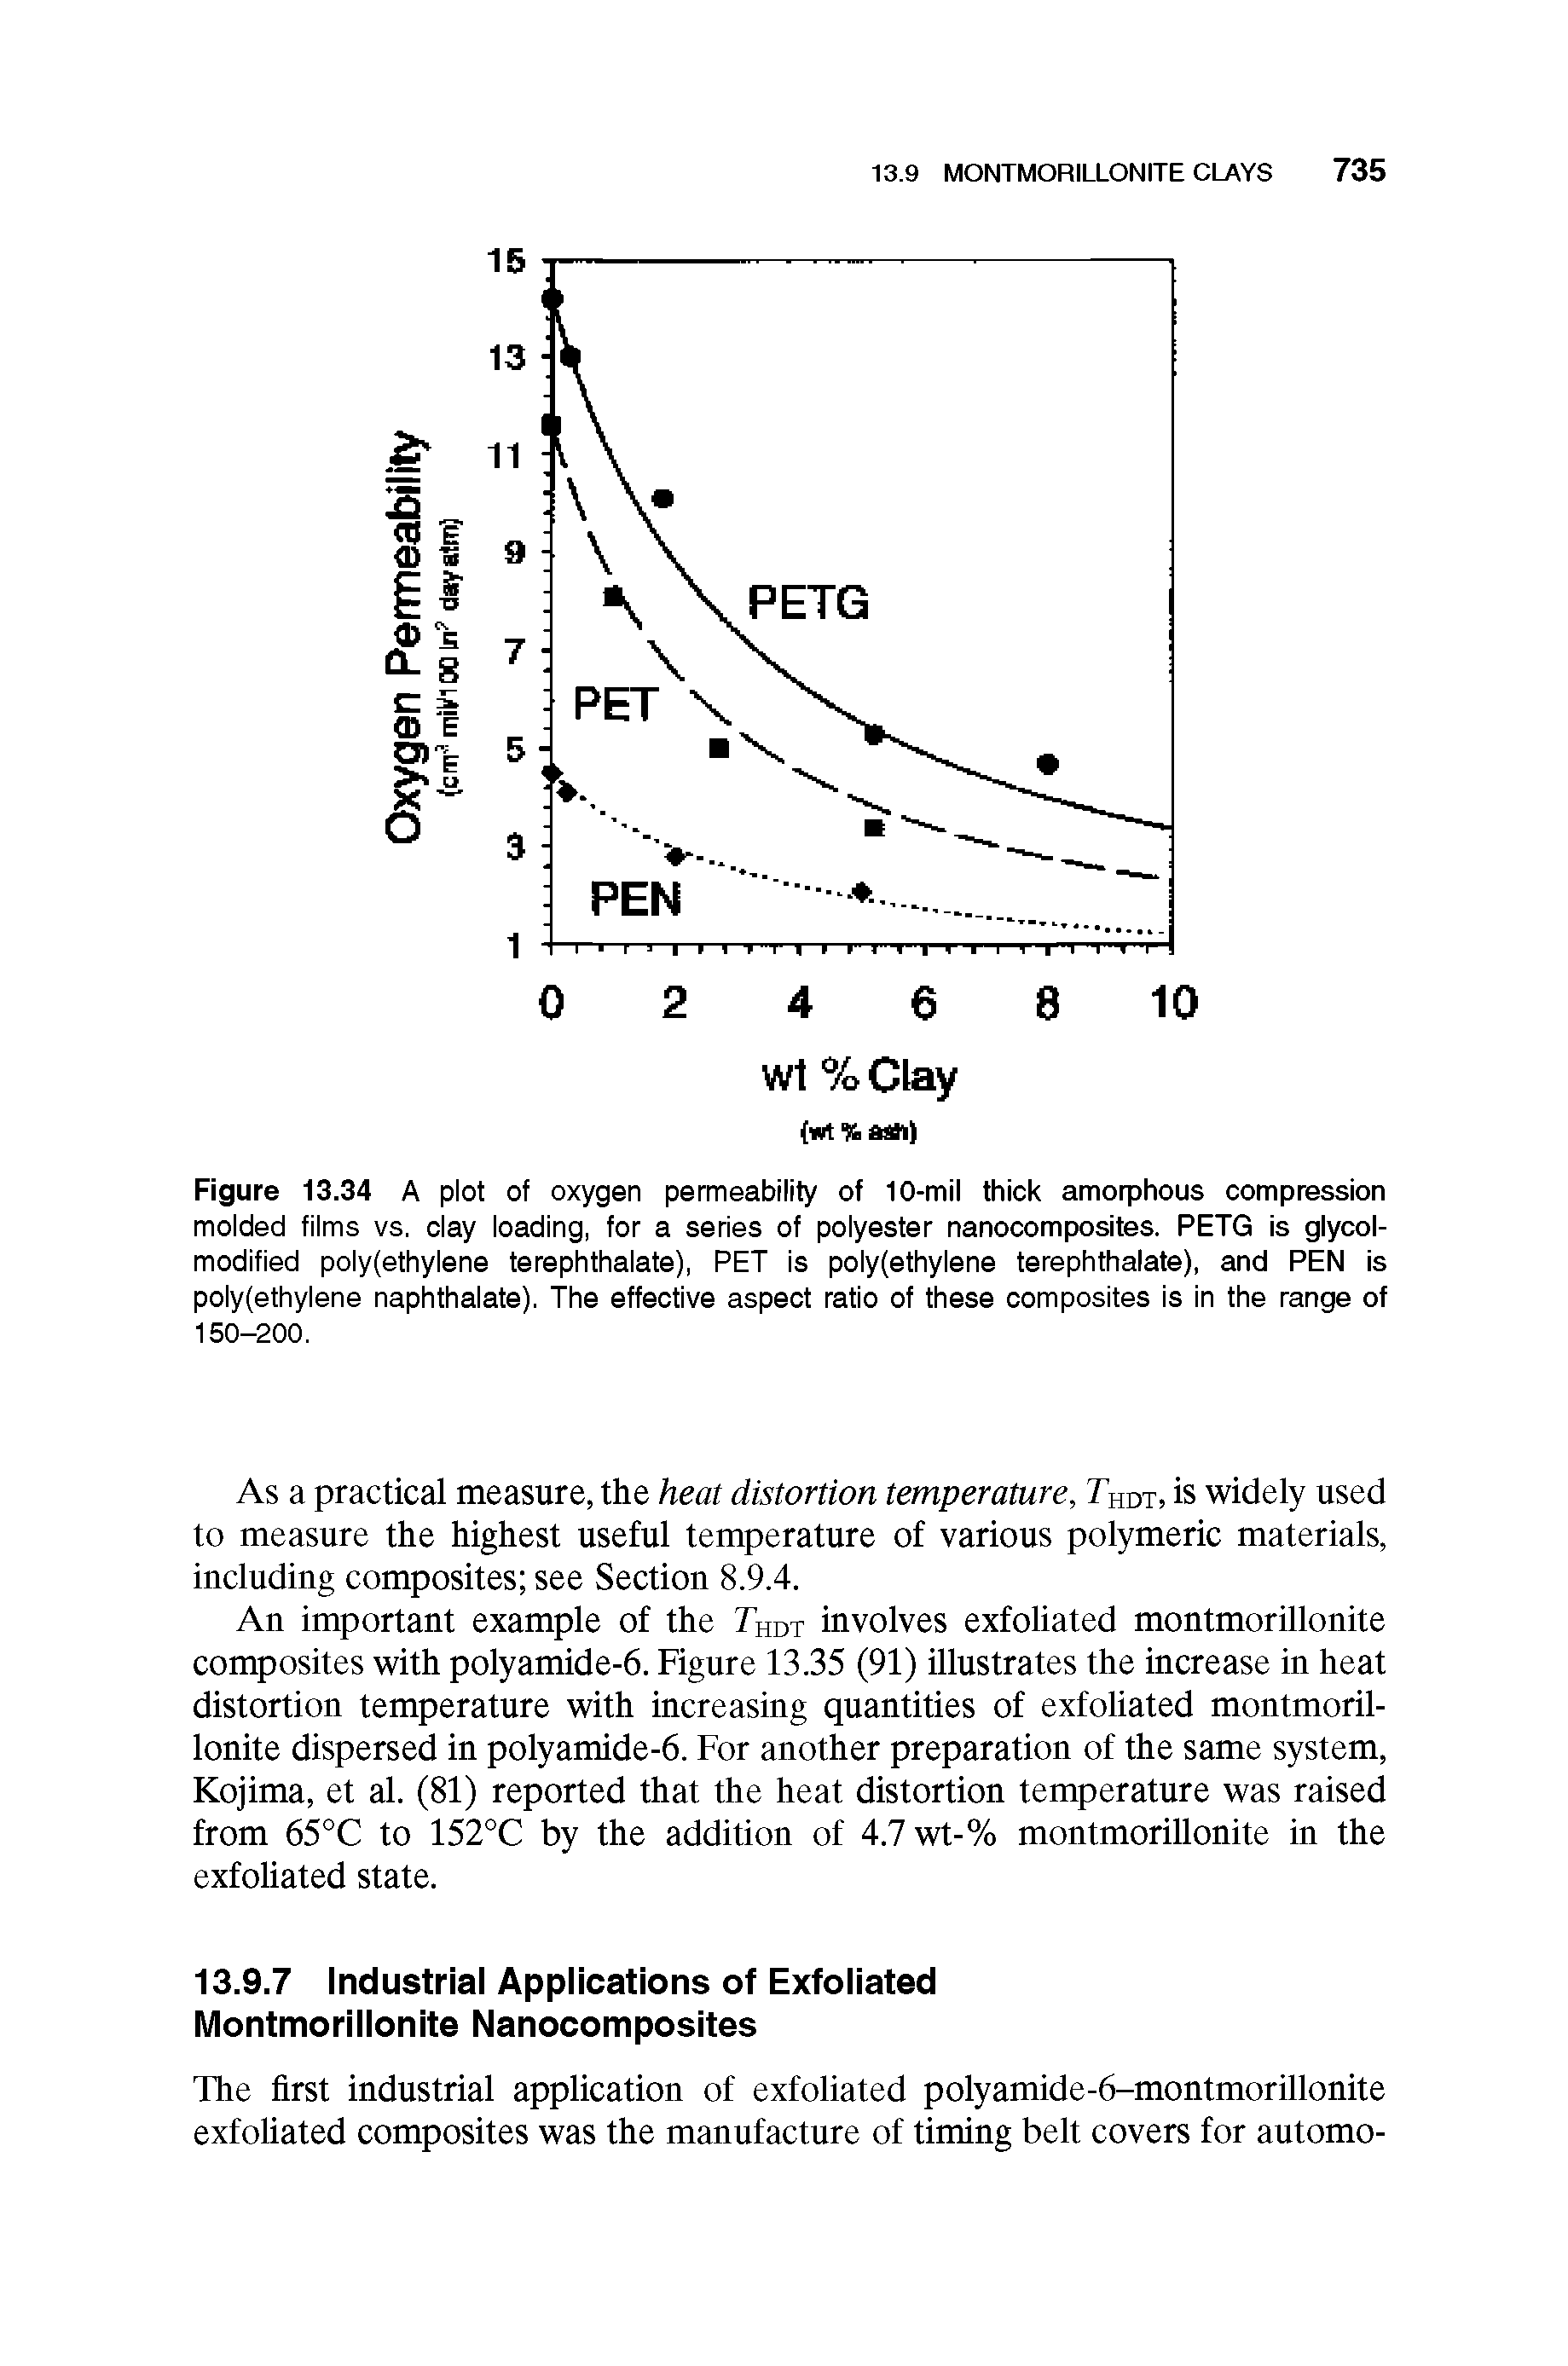 Figure 13.34 A plot of oxygen permeability of 10-mil thick amorphous compression molded films vs. clay loading, tor a series of polyester nanocomposites. PETG is glycol-modified poly(ethylene terephthalate), PET is poly(ethylene terephthalate), and PEN is poly(ethylene naphthalate). The effective aspect ratio of these composites is in the range of 150-200.